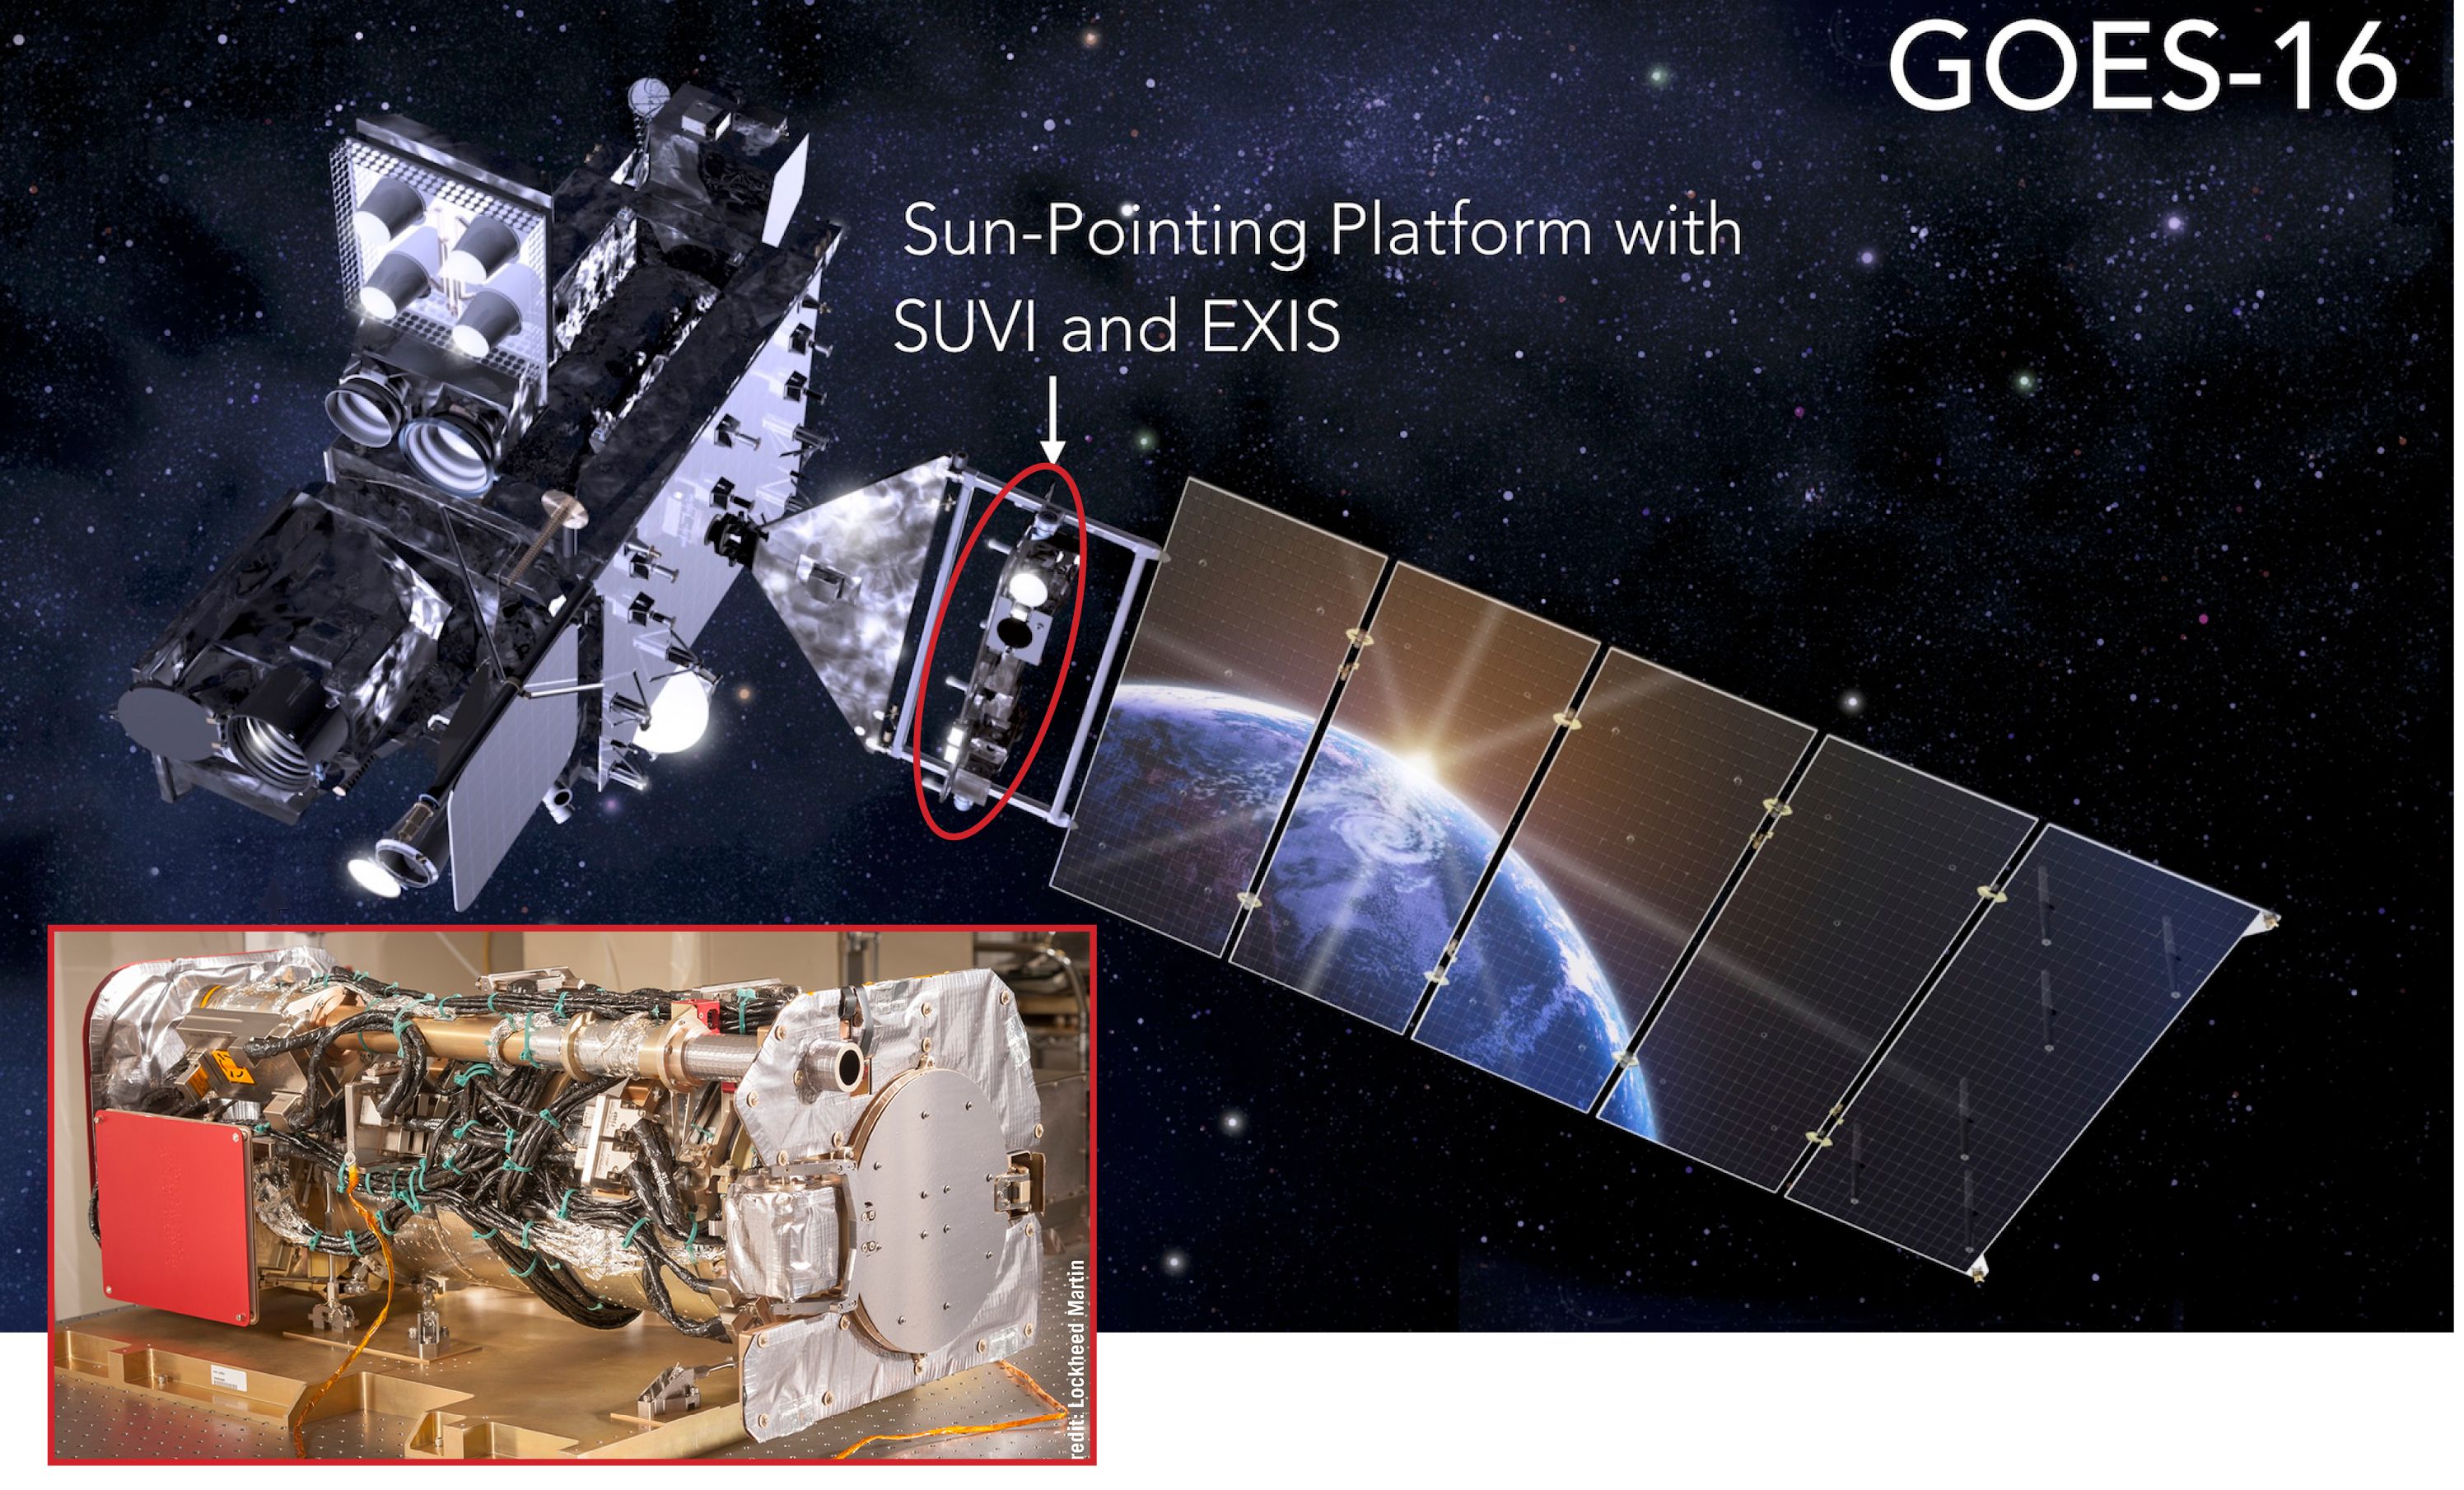 The Solar Ultraviolet Imager (SUVI) is flying on the GOES-R (formerly GOES-16) satellite.